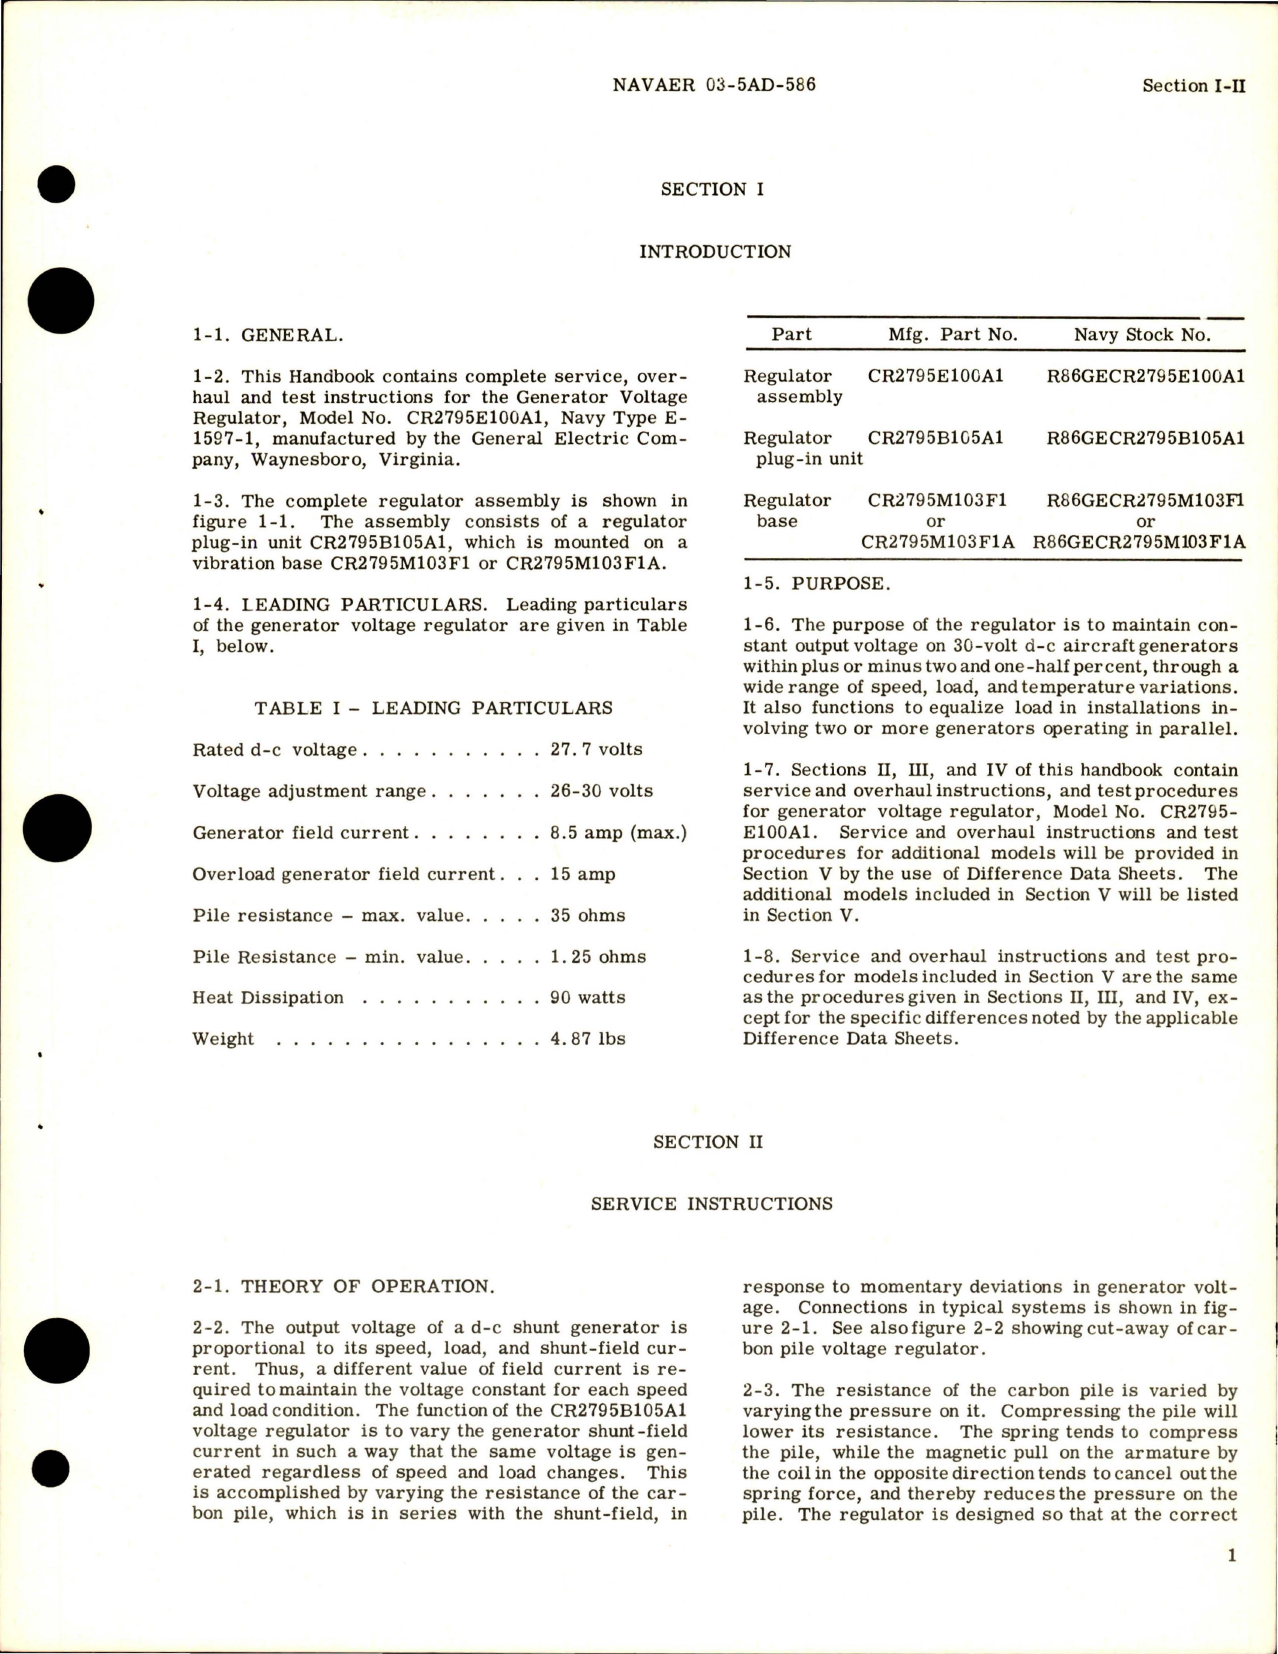 Sample page 5 from AirCorps Library document: Service and Overhaul Instructions for Generator Voltage Regulator - Model CR2795E100A1 